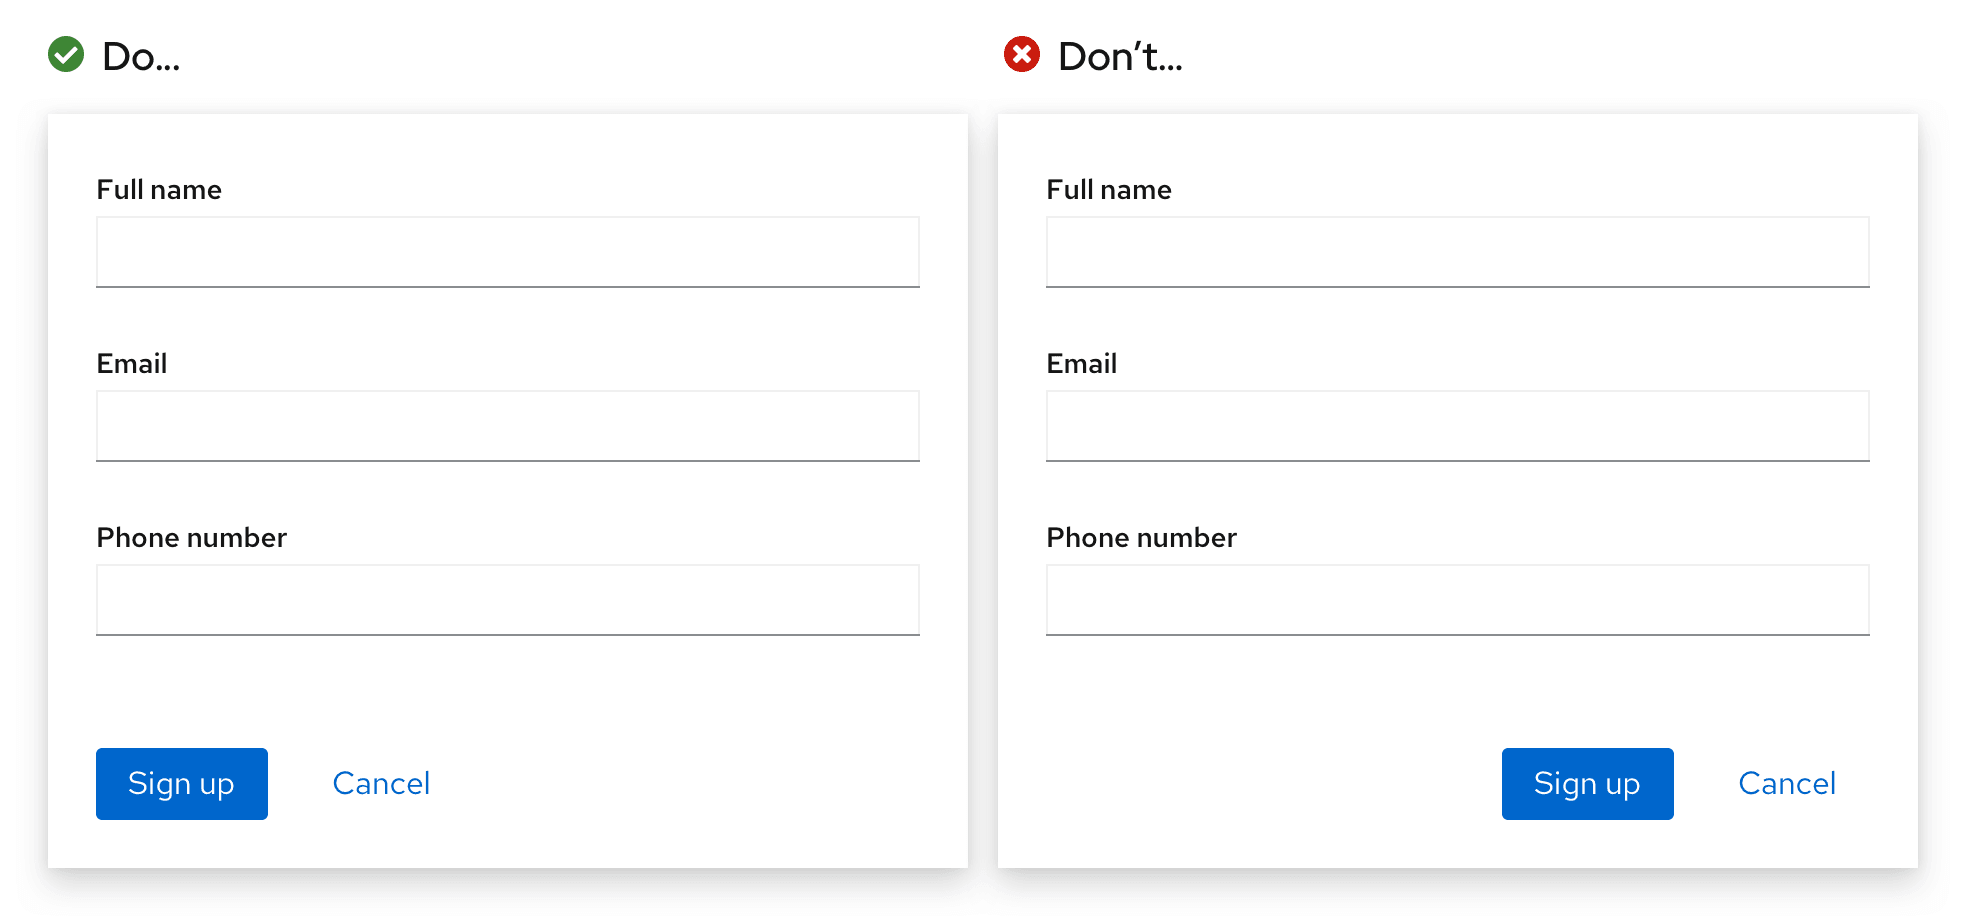 Examples of correct button placement and incorrect button placement in a form